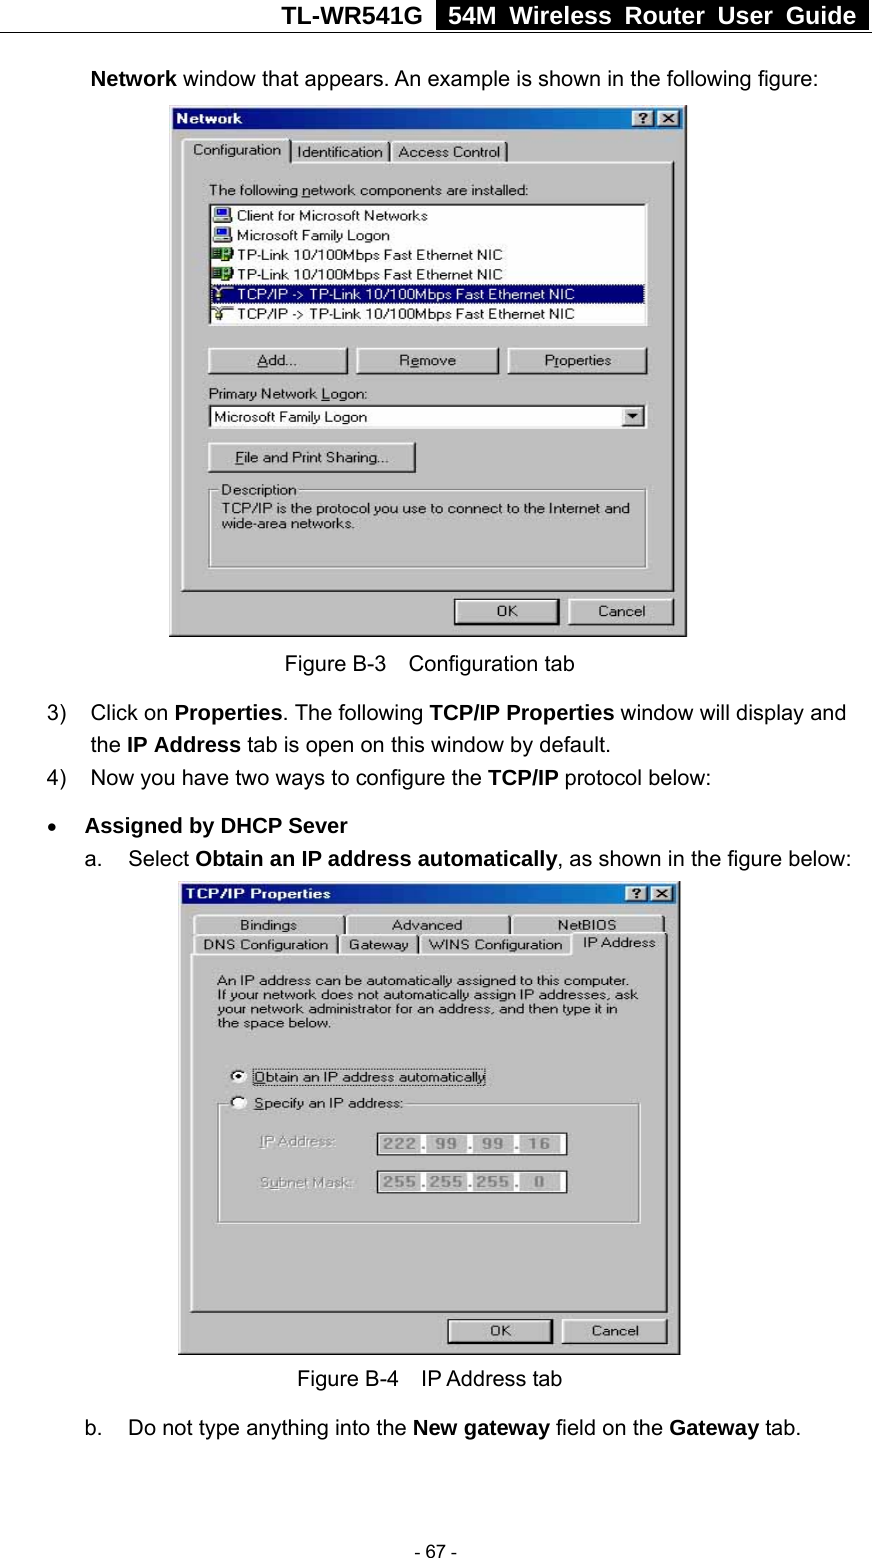 TL-WR541G   54M Wireless Router User Guide  Network window that appears. An example is shown in the following figure:  Figure B-3  Configuration tab 3) Click on Properties. The following TCP/IP Properties window will display and the IP Address tab is open on this window by default. 4)  Now you have two ways to configure the TCP/IP protocol below: • Assigned by DHCP Sever a. Select Obtain an IP address automatically, as shown in the figure below:  Figure B-4  IP Address tab b.  Do not type anything into the New gateway field on the Gateway tab.    - 67 - 